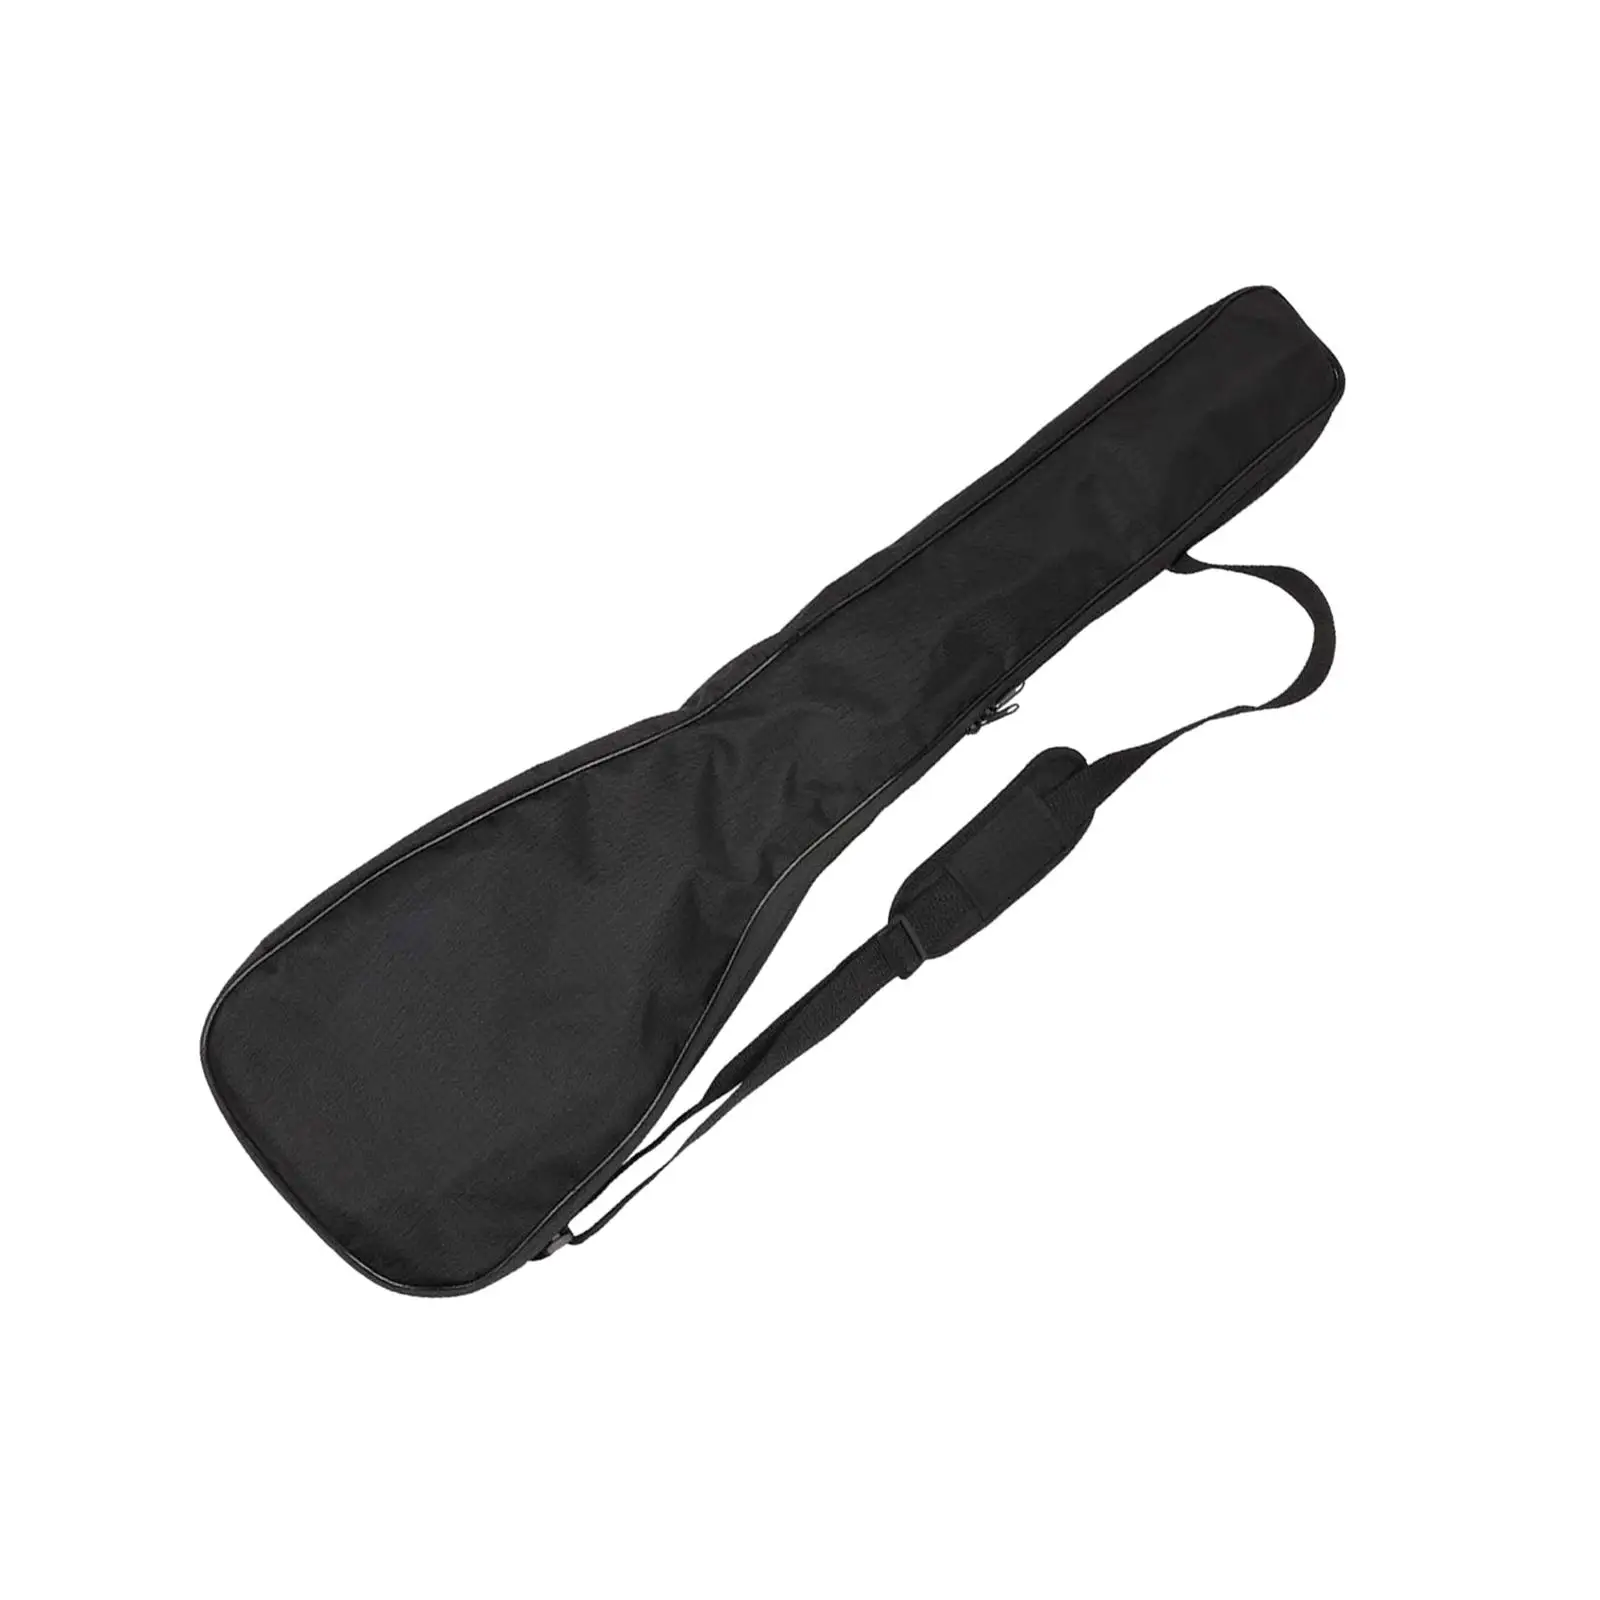 Portable Kayak Paddle Bag for 3 Piece Split Paddle Stylish with Carry Handle, Removable Shoulder Strap